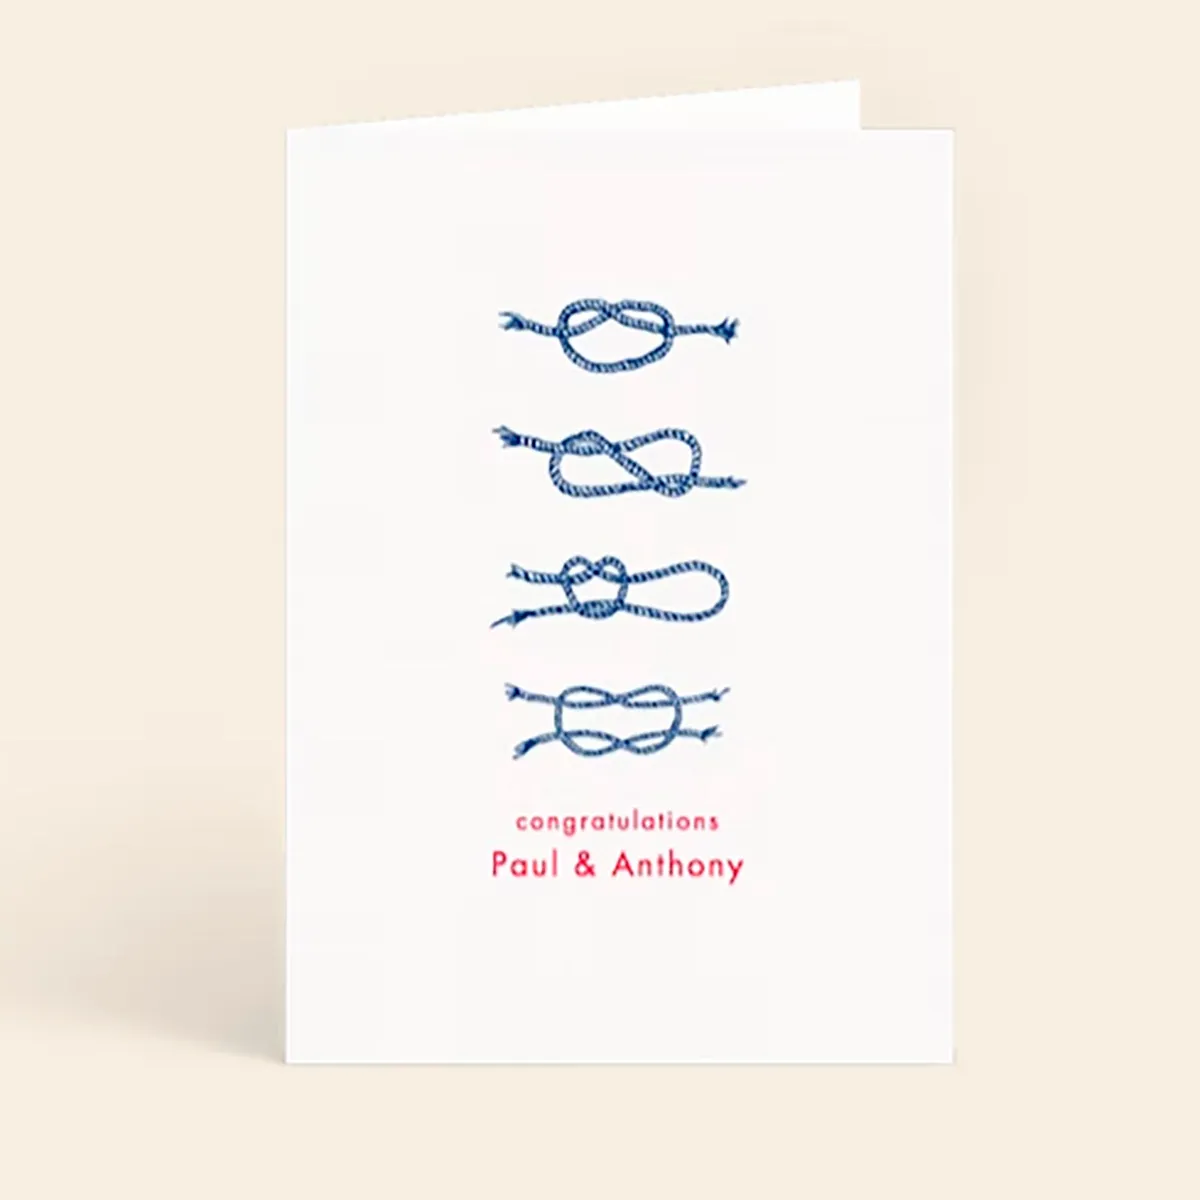 Tie the knot card from Papier